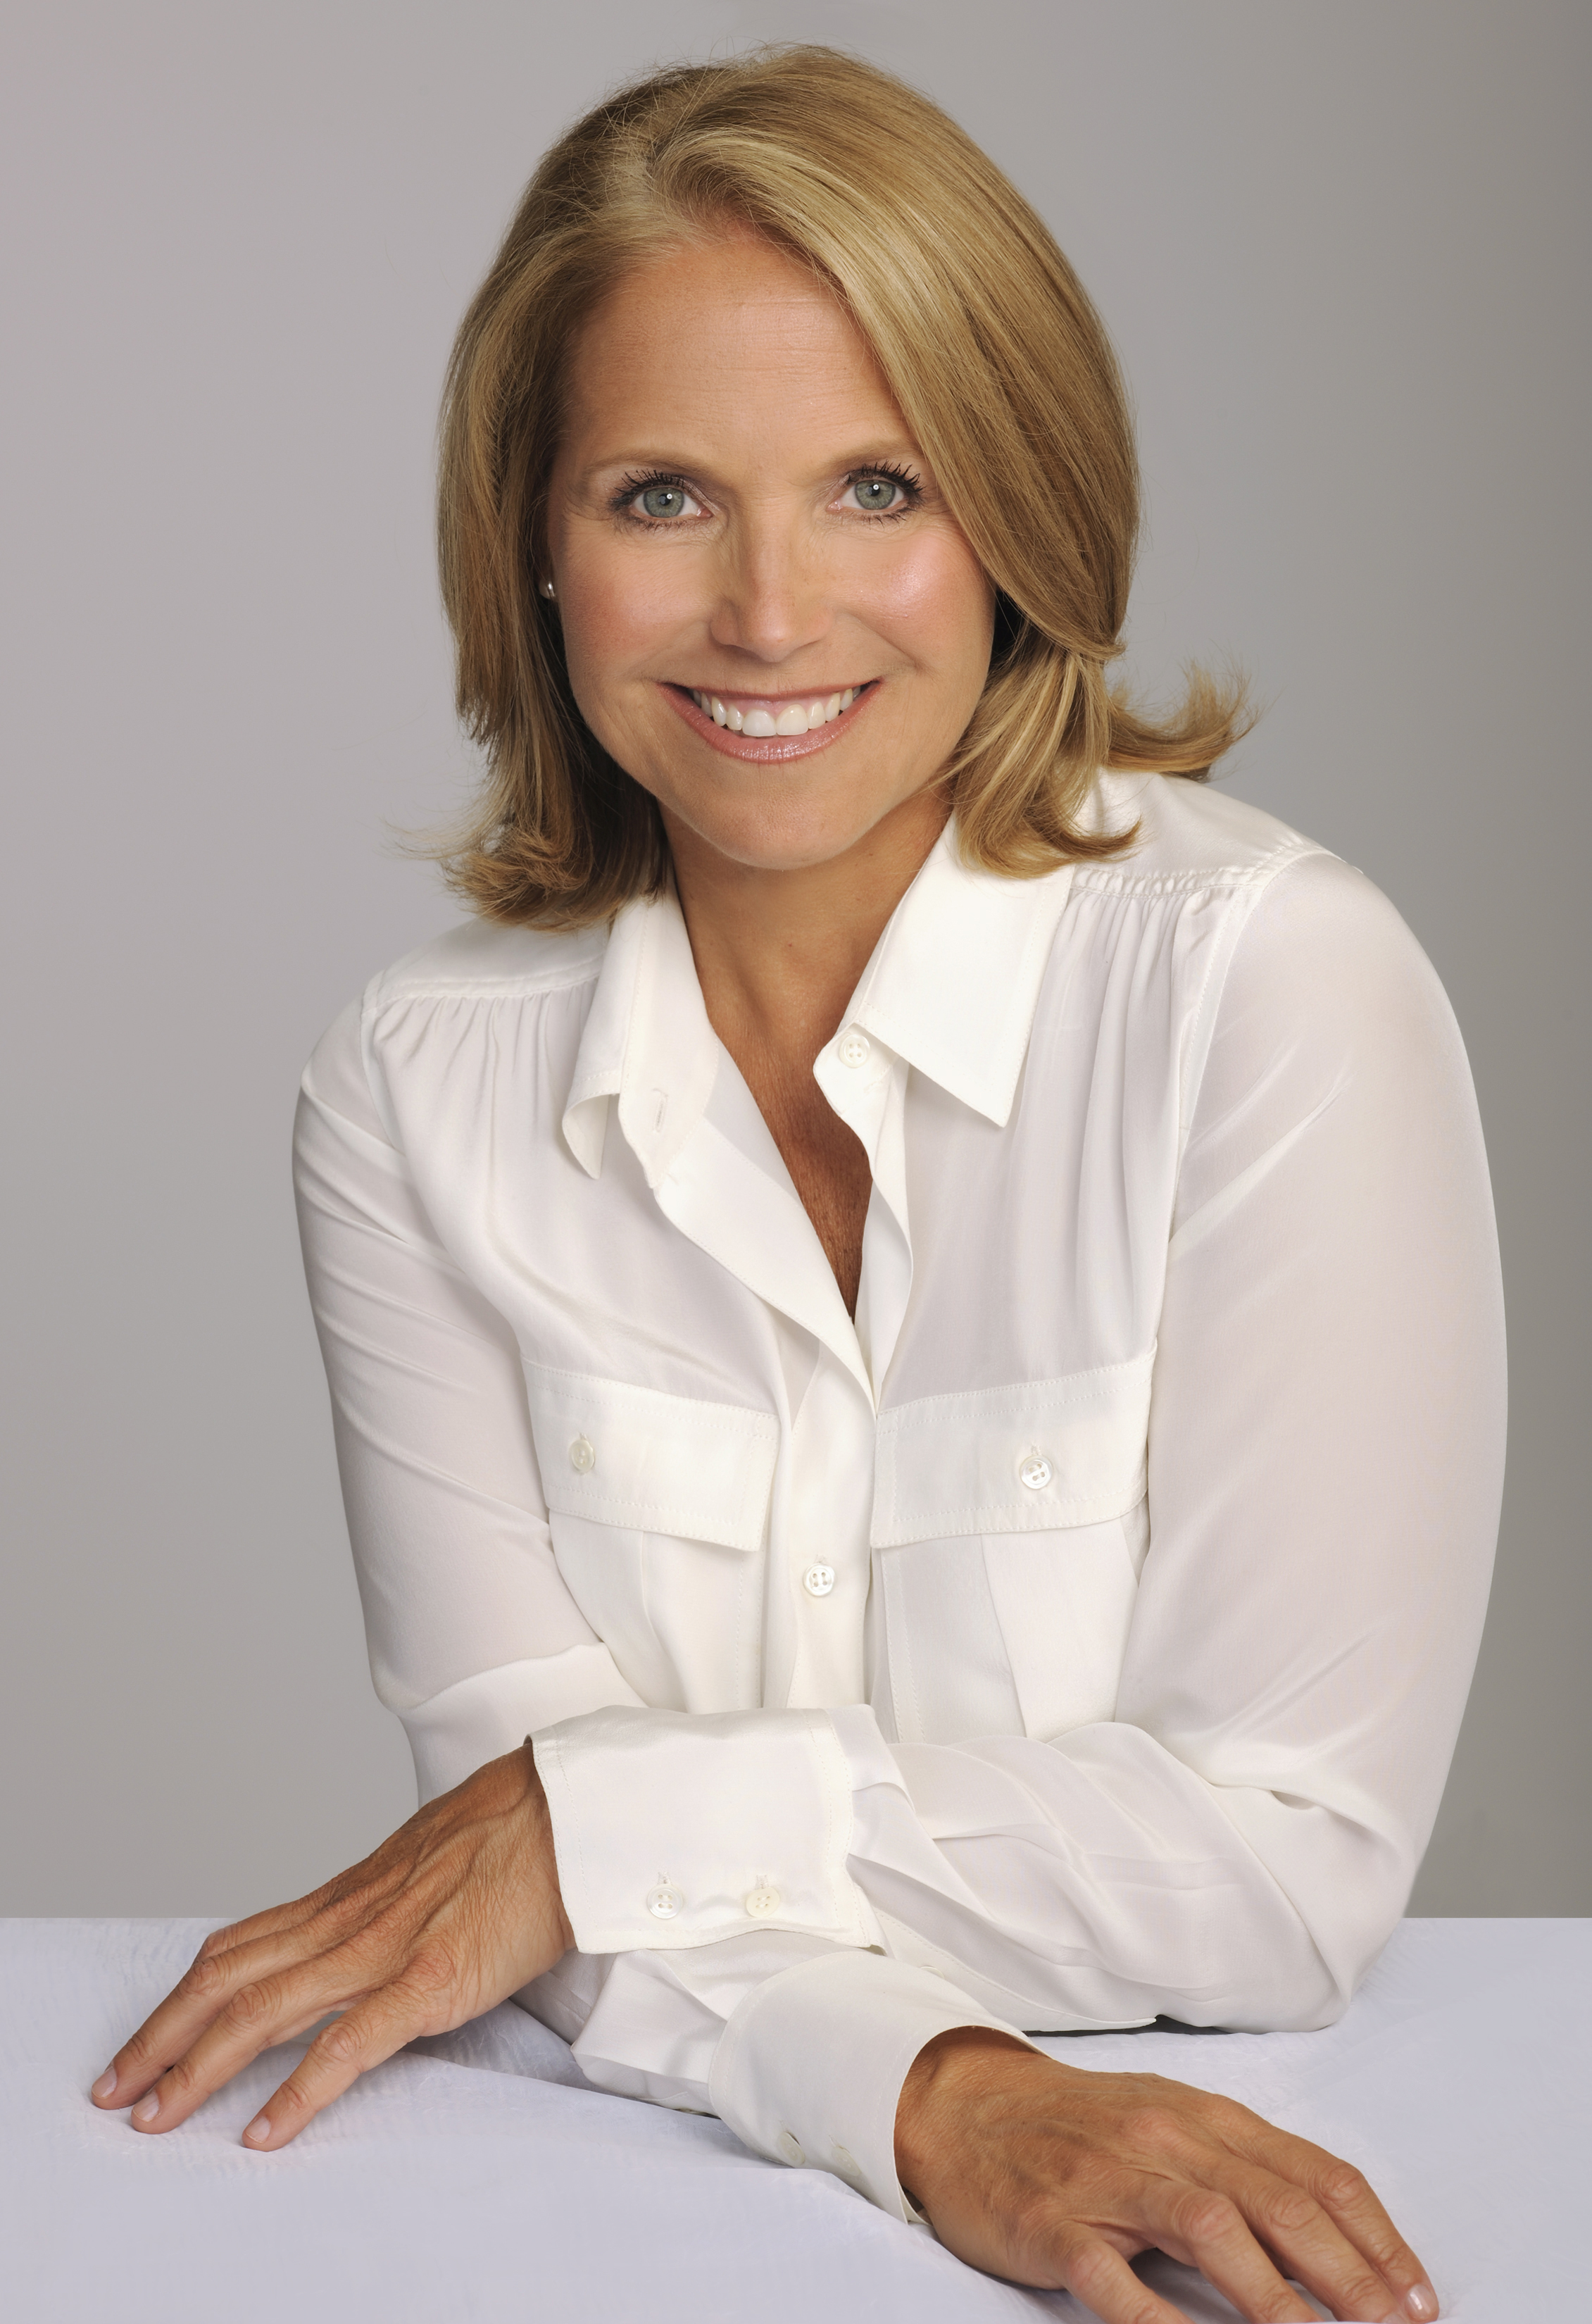 Journalist, Author and Cancer Advocate Katie Couric, '79 Alumna, Will